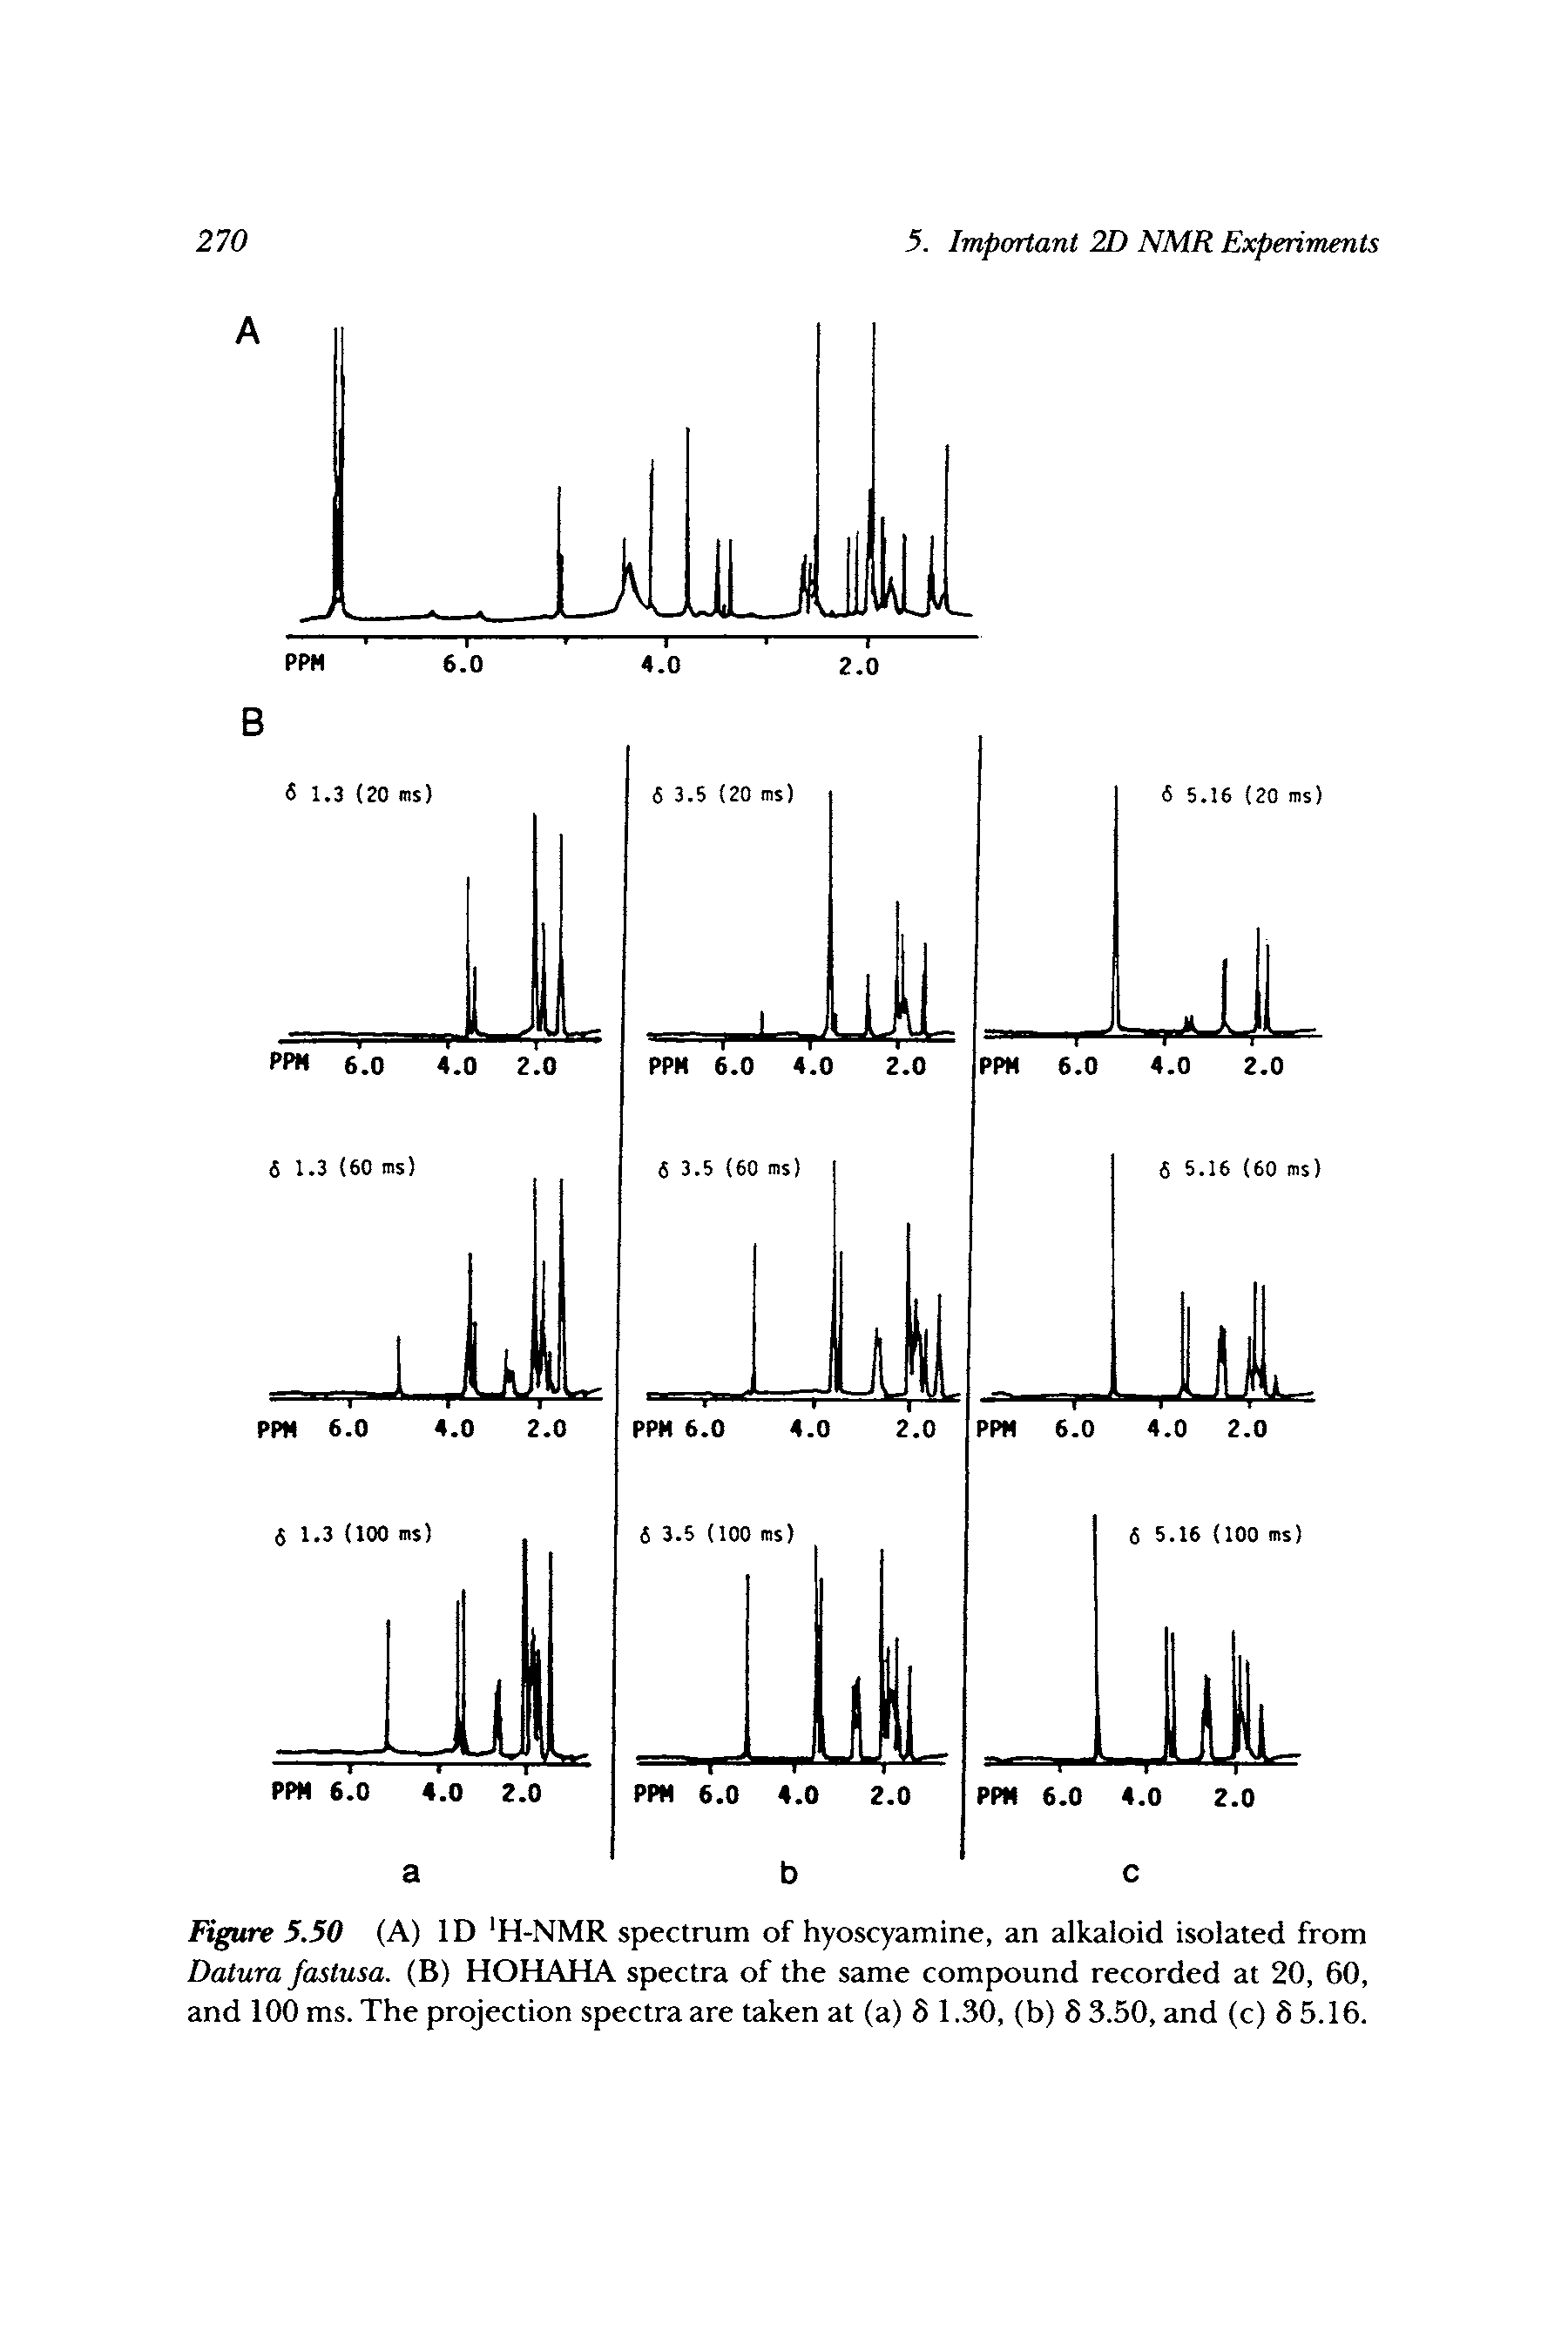 Figure 5.50 (A) ID H-NMR spectrum of hyoscyamine, an alkaloid isolated from Datura fastusa. (B) HOHAHA spectra of the same compound recorded at 20, 60, and 100 ms. The projection spectra are taken at (a) 8 1.30, (b) 8 3.50, and (c) 8 5.16.